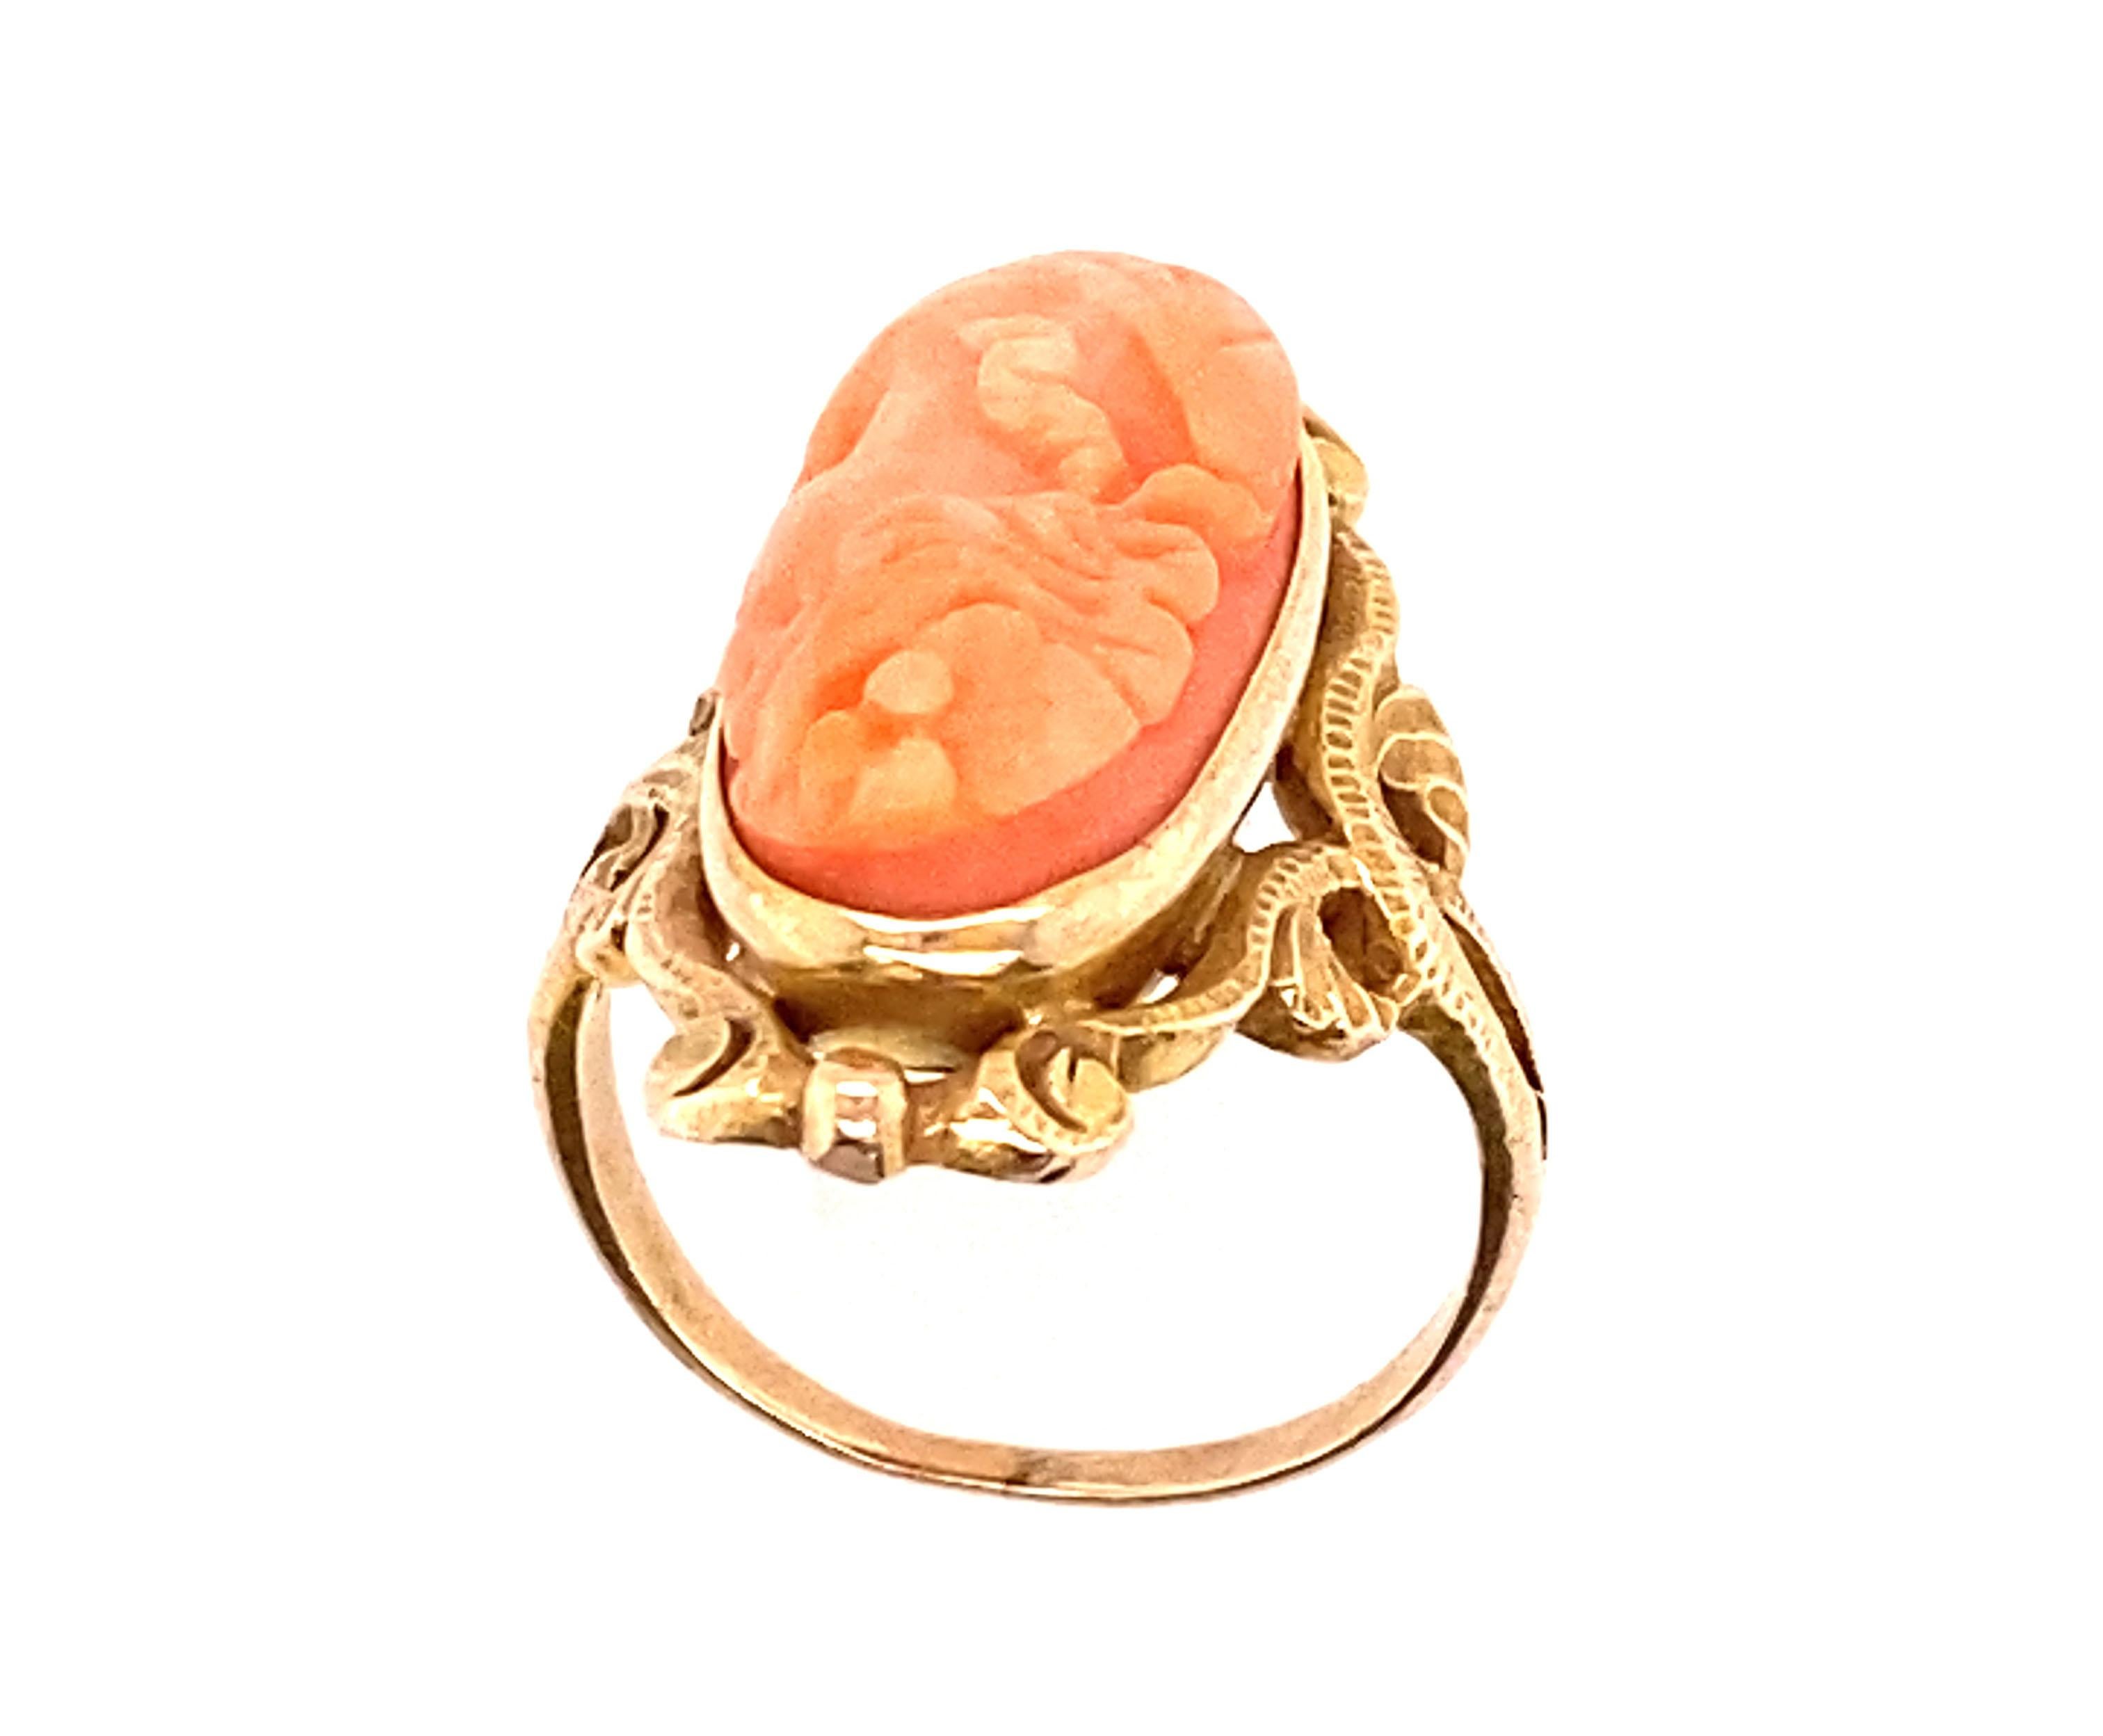 Genuine Original Art Noveau Antique from 1895's-1910's Hand Carved Angel Skin Coral Cameo Cocktail Ring  14K Yellow Gold

 

Featuring a Gorgeous 18.8 x 9.5 mm Angel Skin Coral Hand Carved Cameo

Exquisite Hand Carved Angel Skin Coral Eye